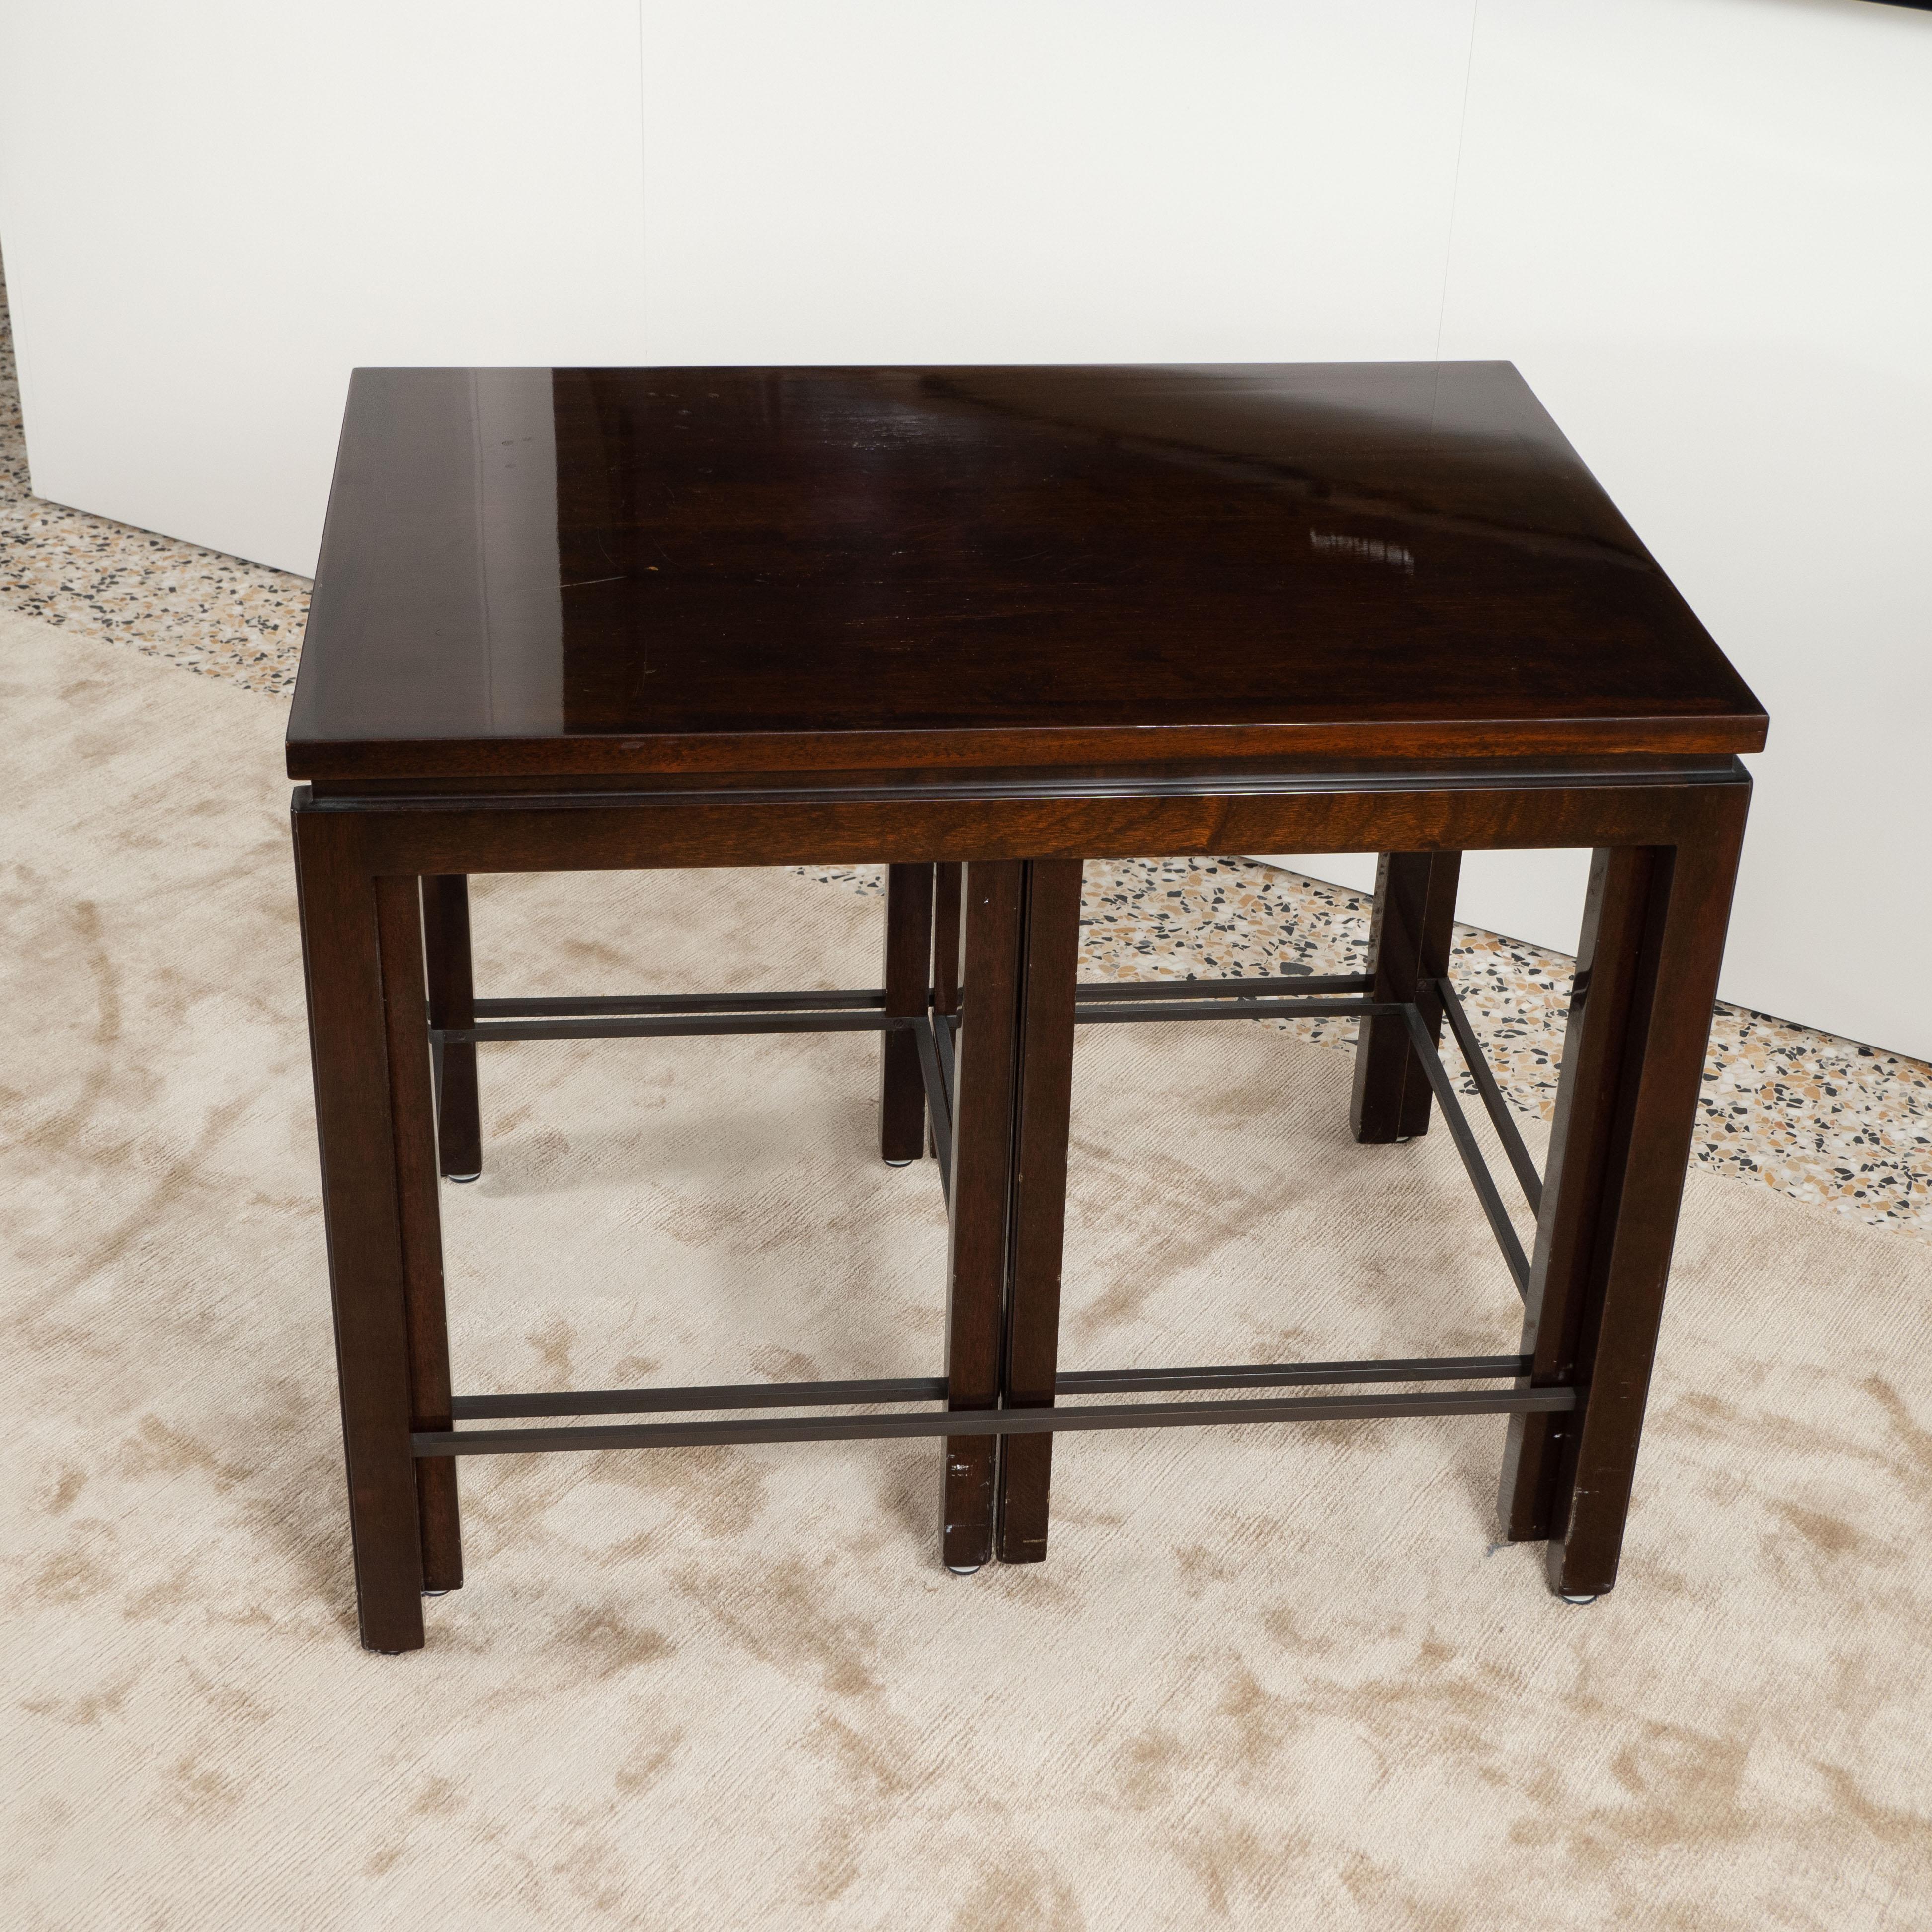 Dunbar Janus Set of 3 Nesting Tables by Edward Wormley from Alan Moss 5